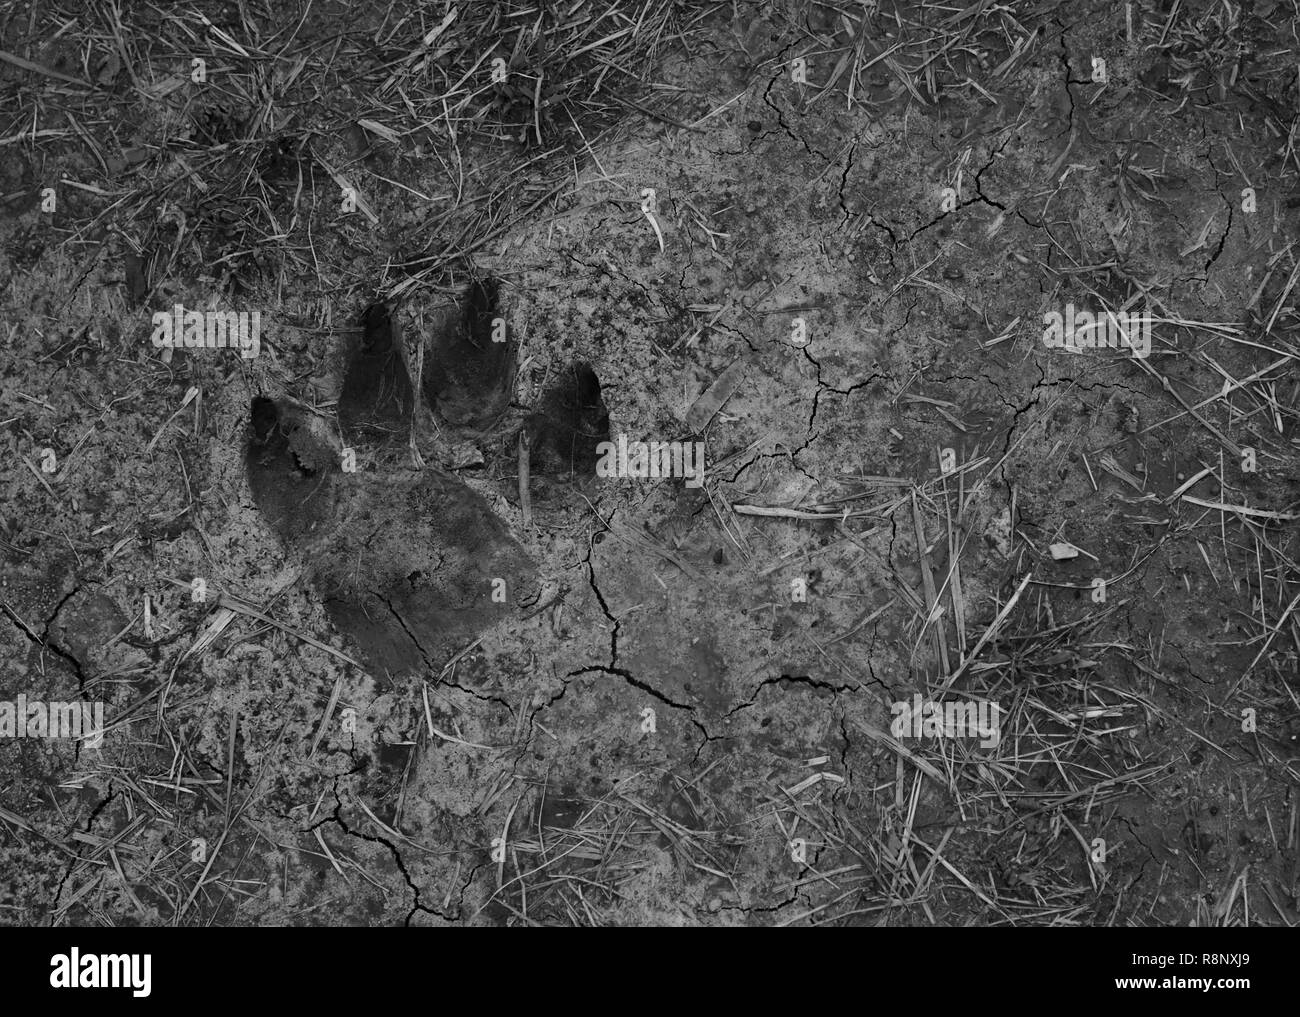 Close up view of dog paw imprint on soil Stock Photo